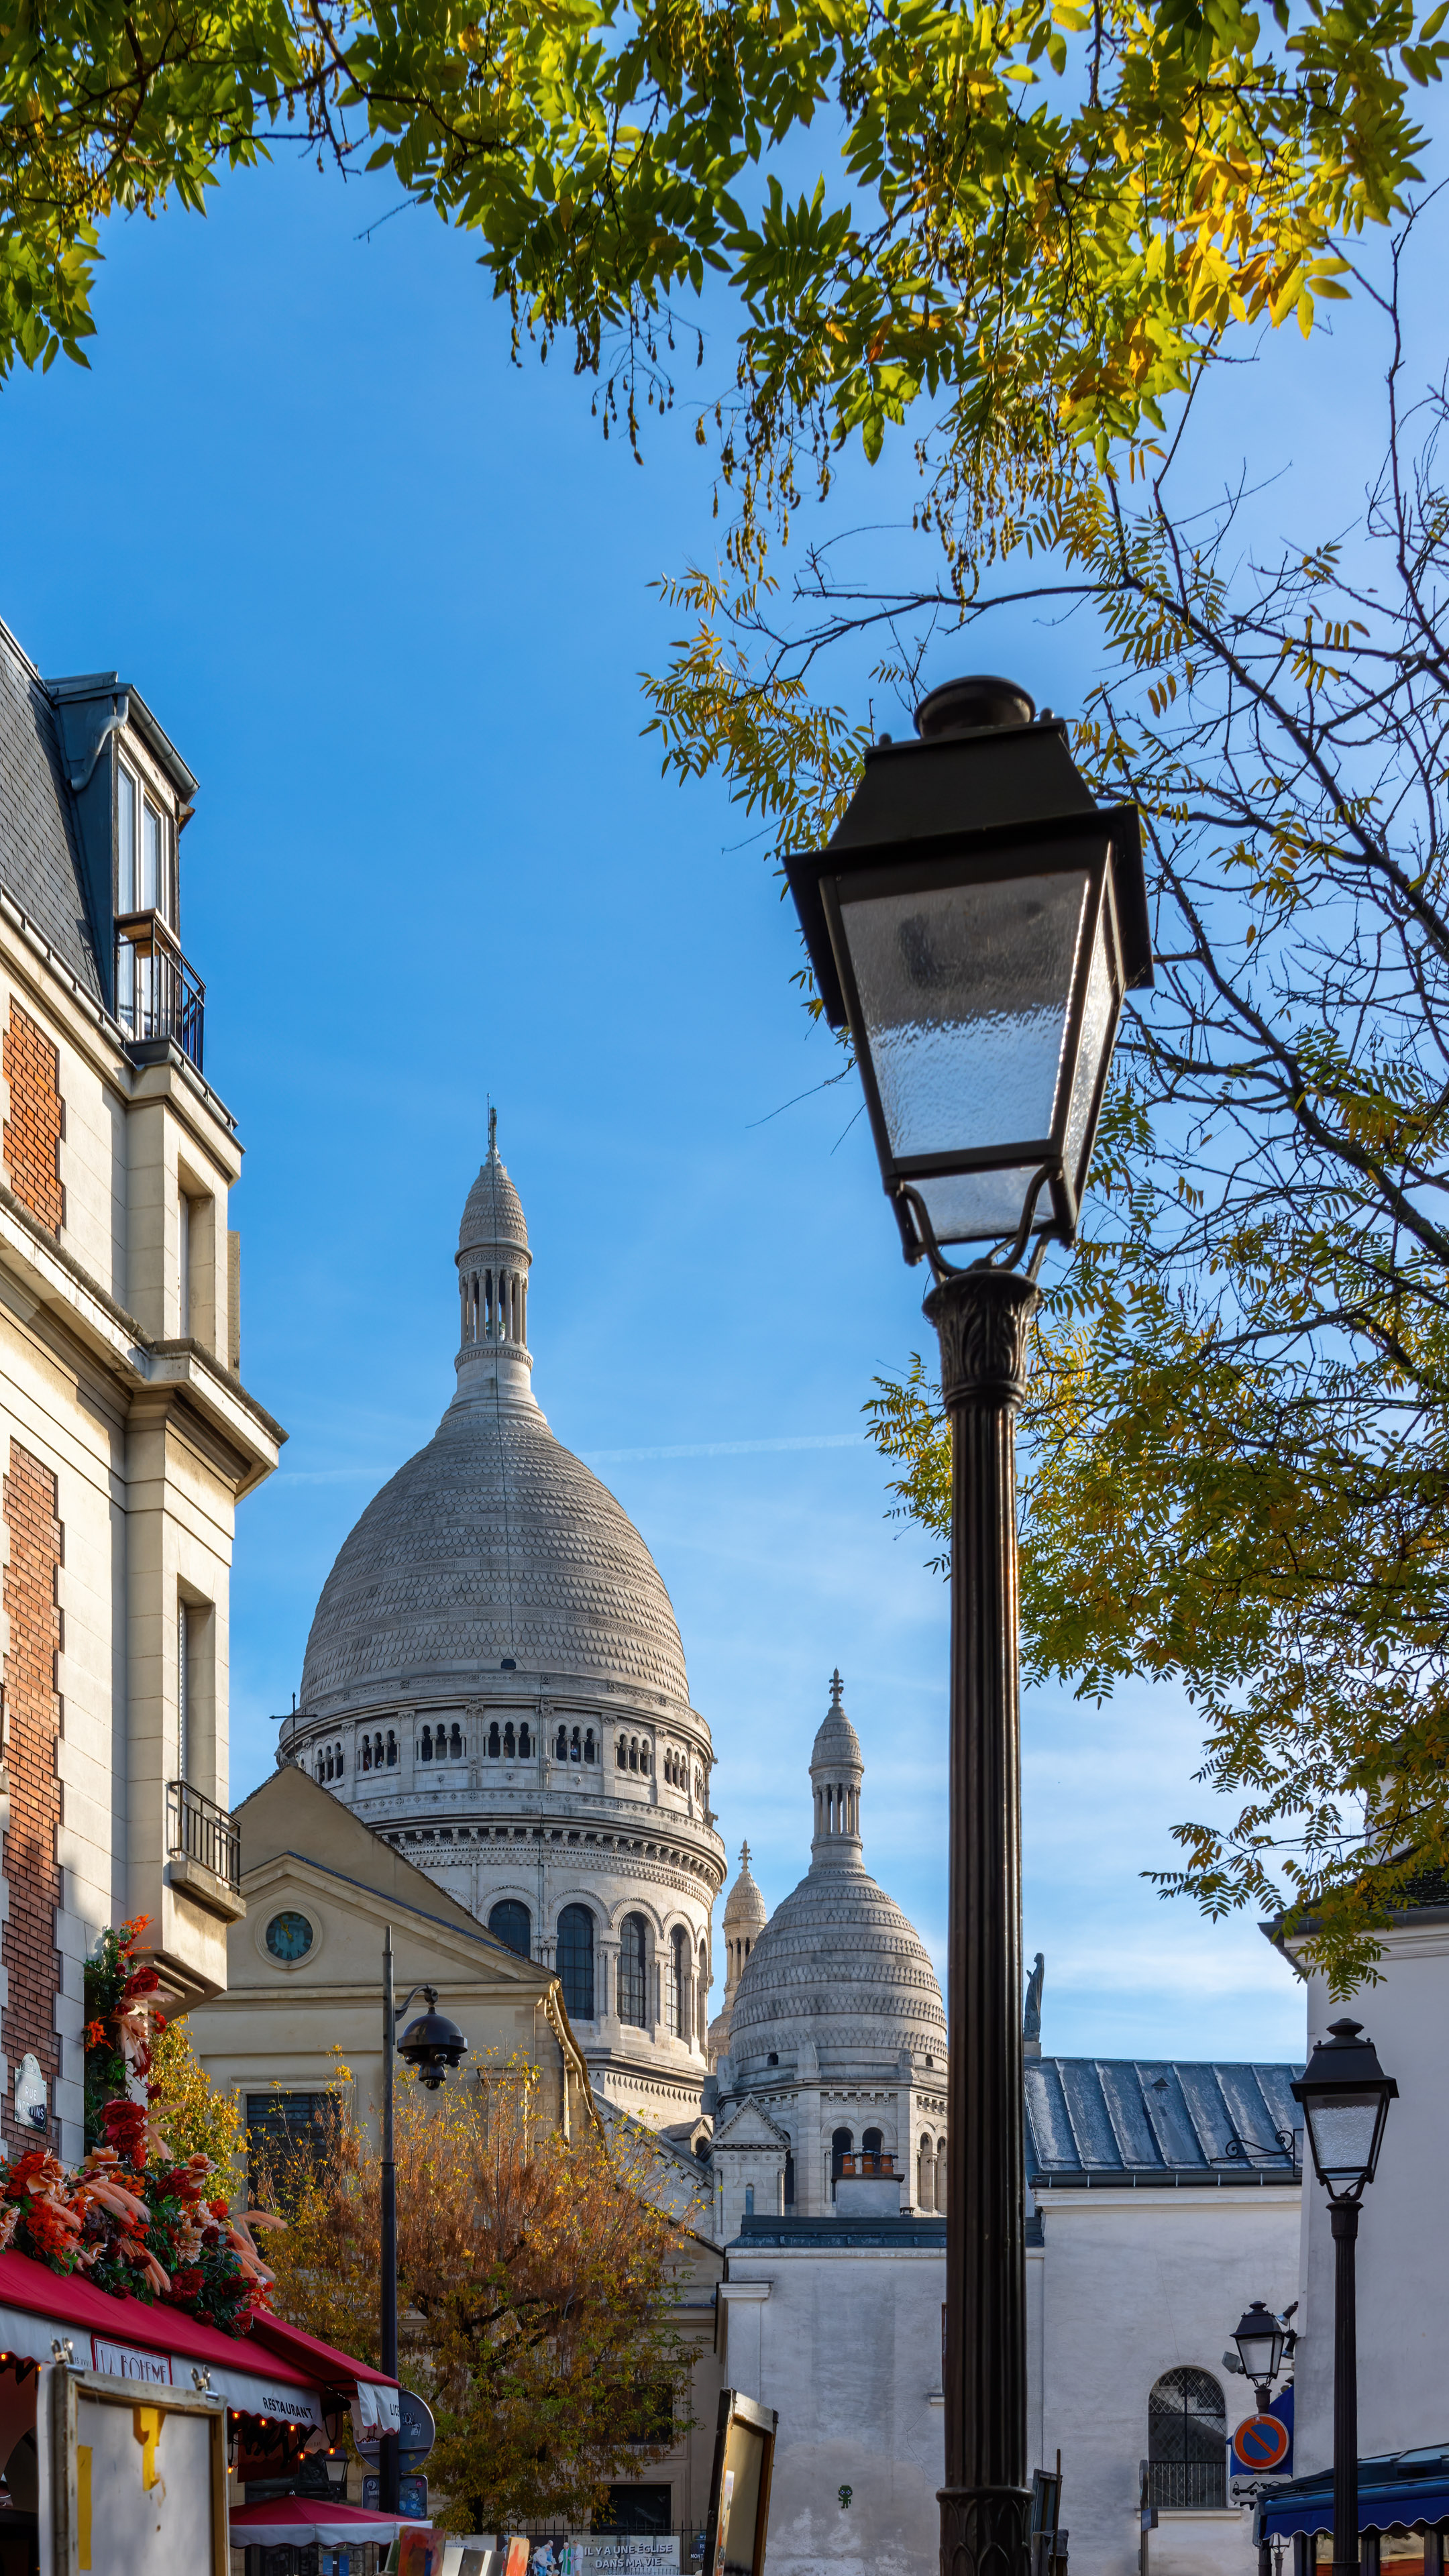 Experience the timeless beauty of Paris with this city background for iPhone featuring classic Parisian architecture and the Basilica of the Sacré-Cœur in the distance.